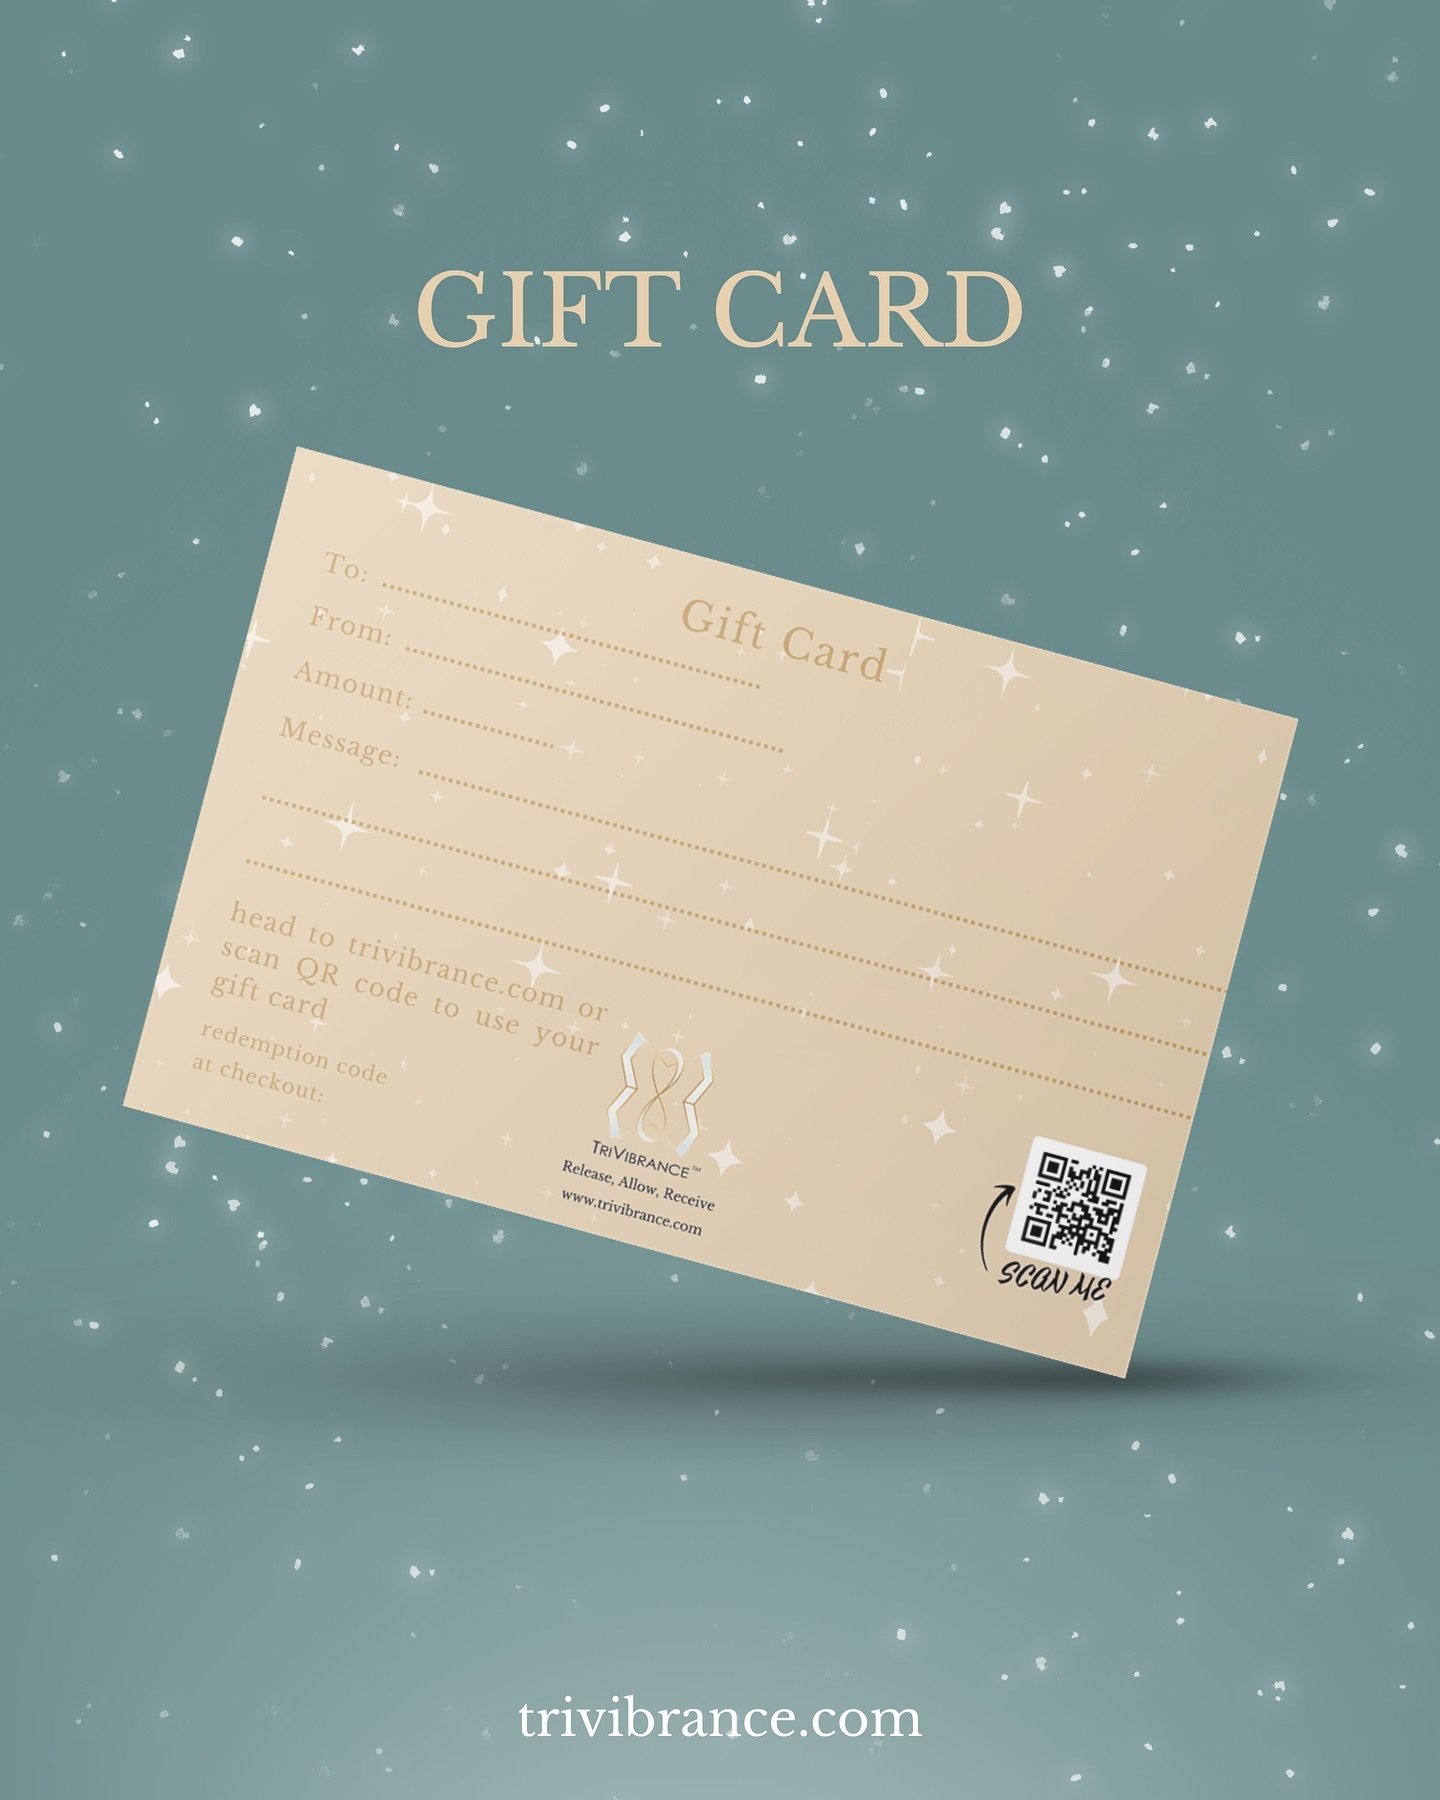 Looking for a gift for your mom so that she can support her emotional wellbeing?

Help her unlock a world of possibilities with our wide range of products, one gift card at a time 🌟

Choose between a mailable or electronic gift card 🤍

www.trivibra